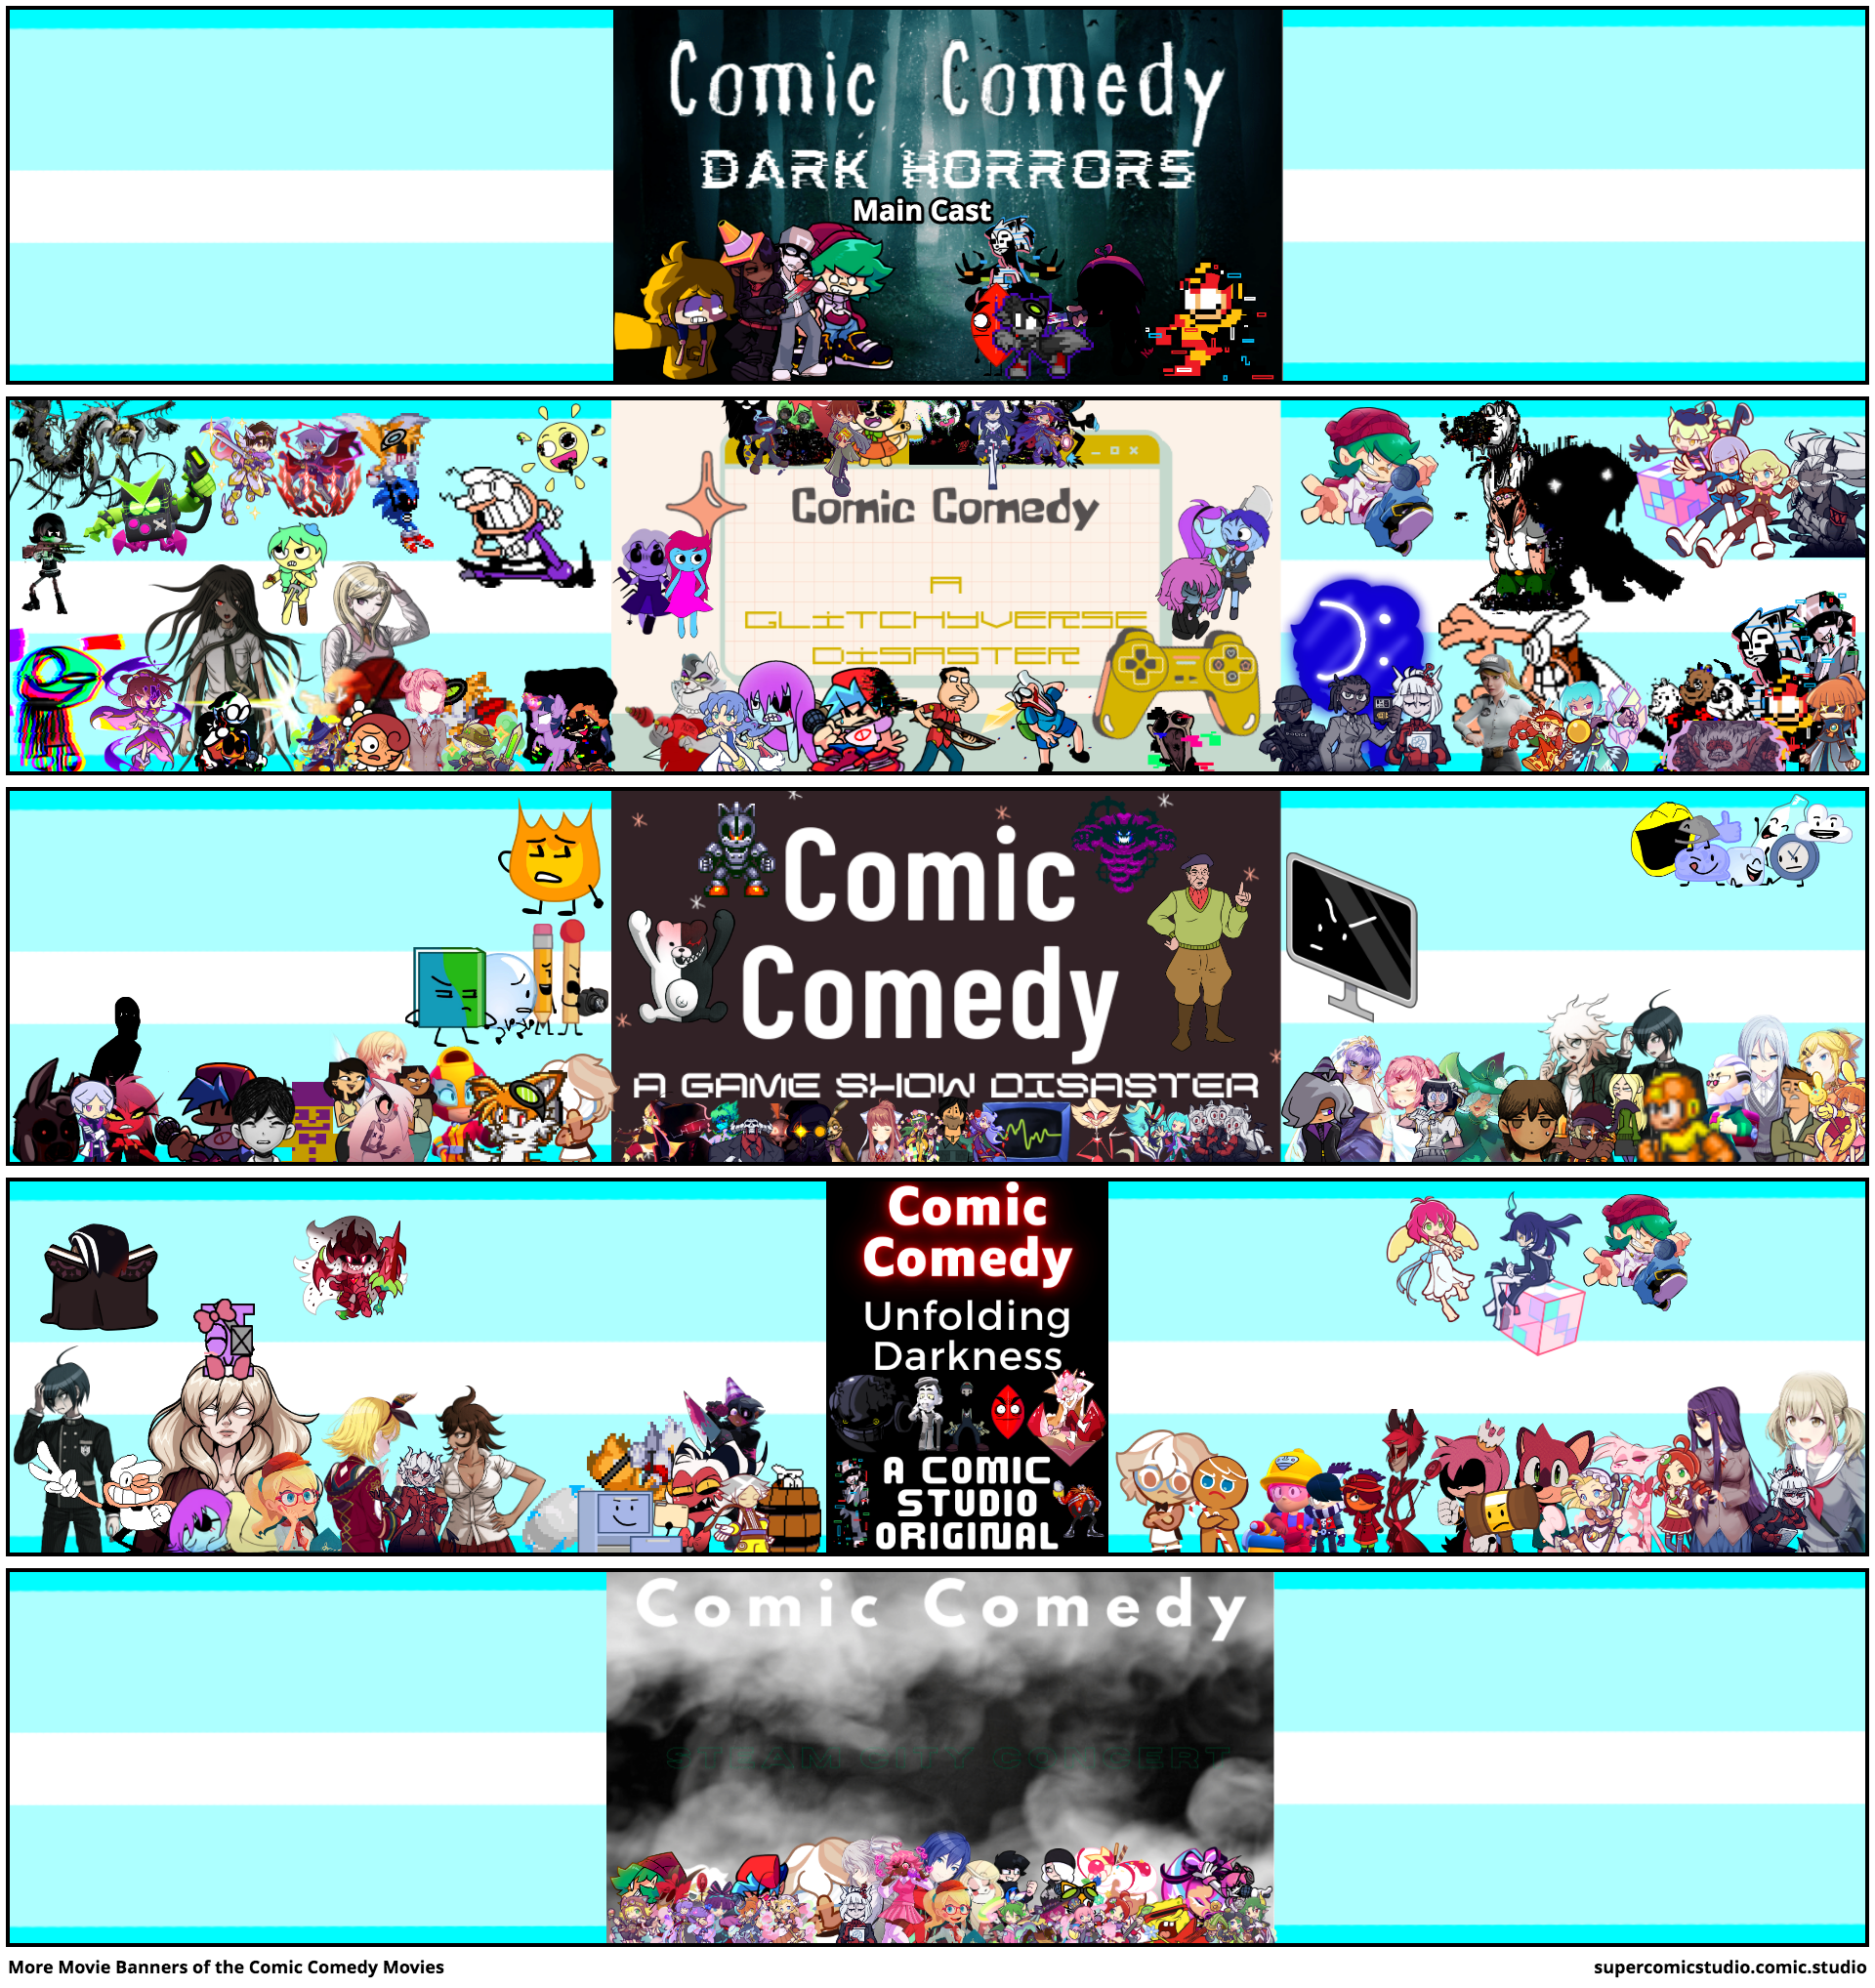 More Movie Banners of the Comic Comedy Movies